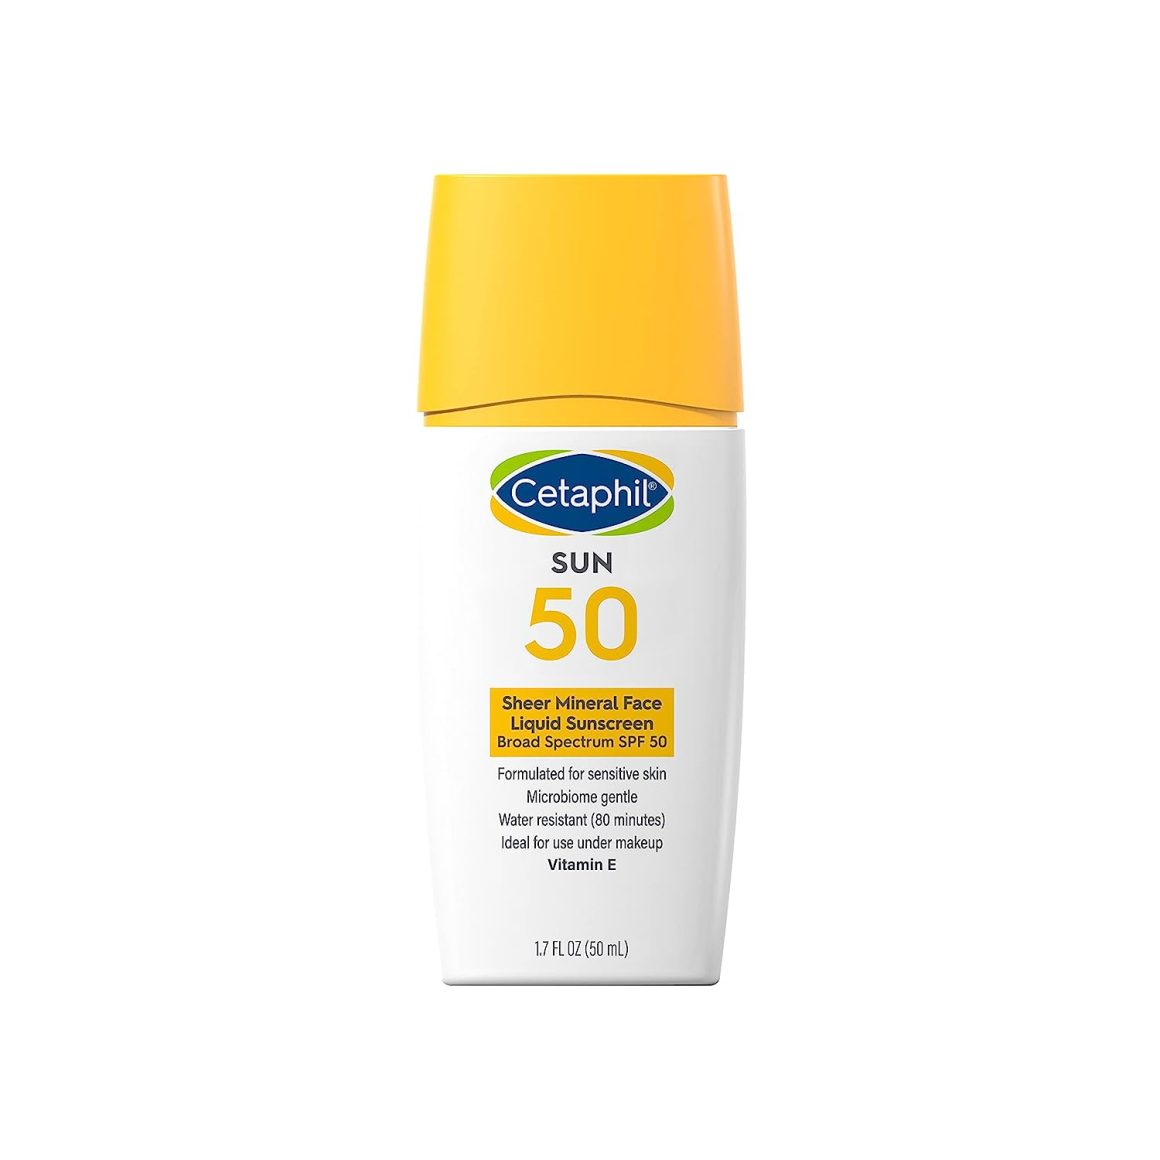 Sunscreen with SPF 50